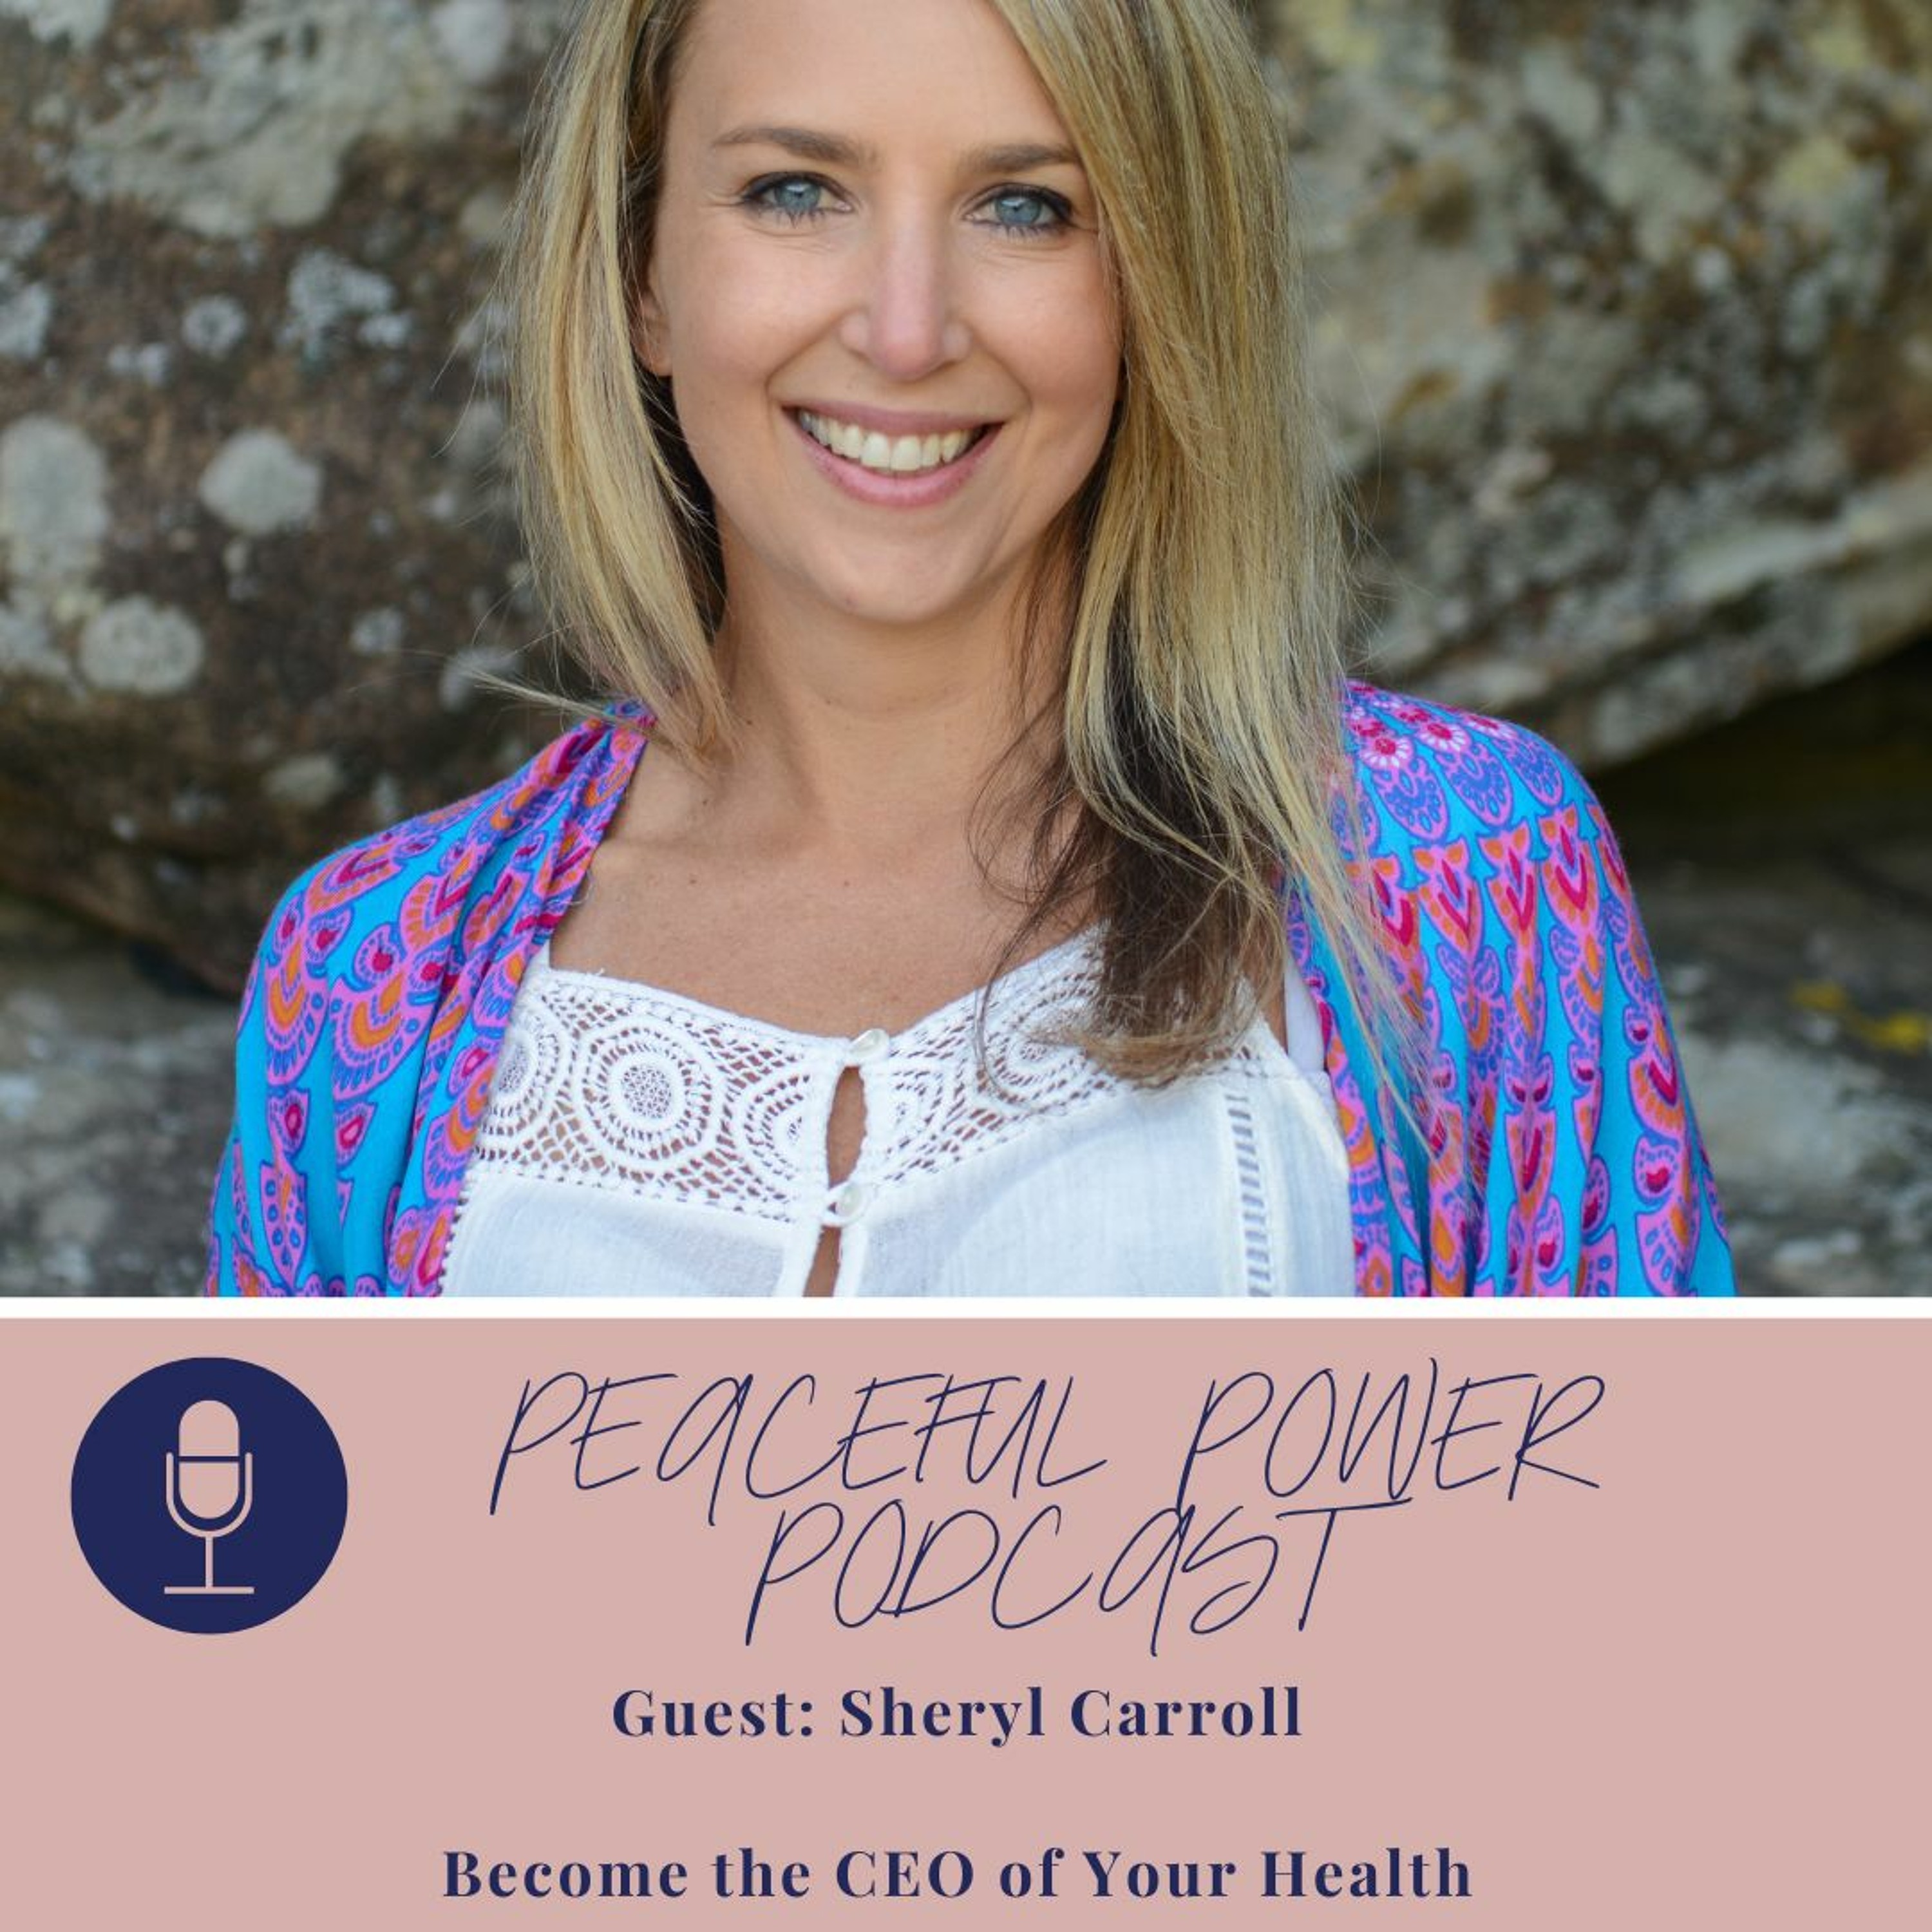 Sheryl Carroll on Becoming the CEO of your Health